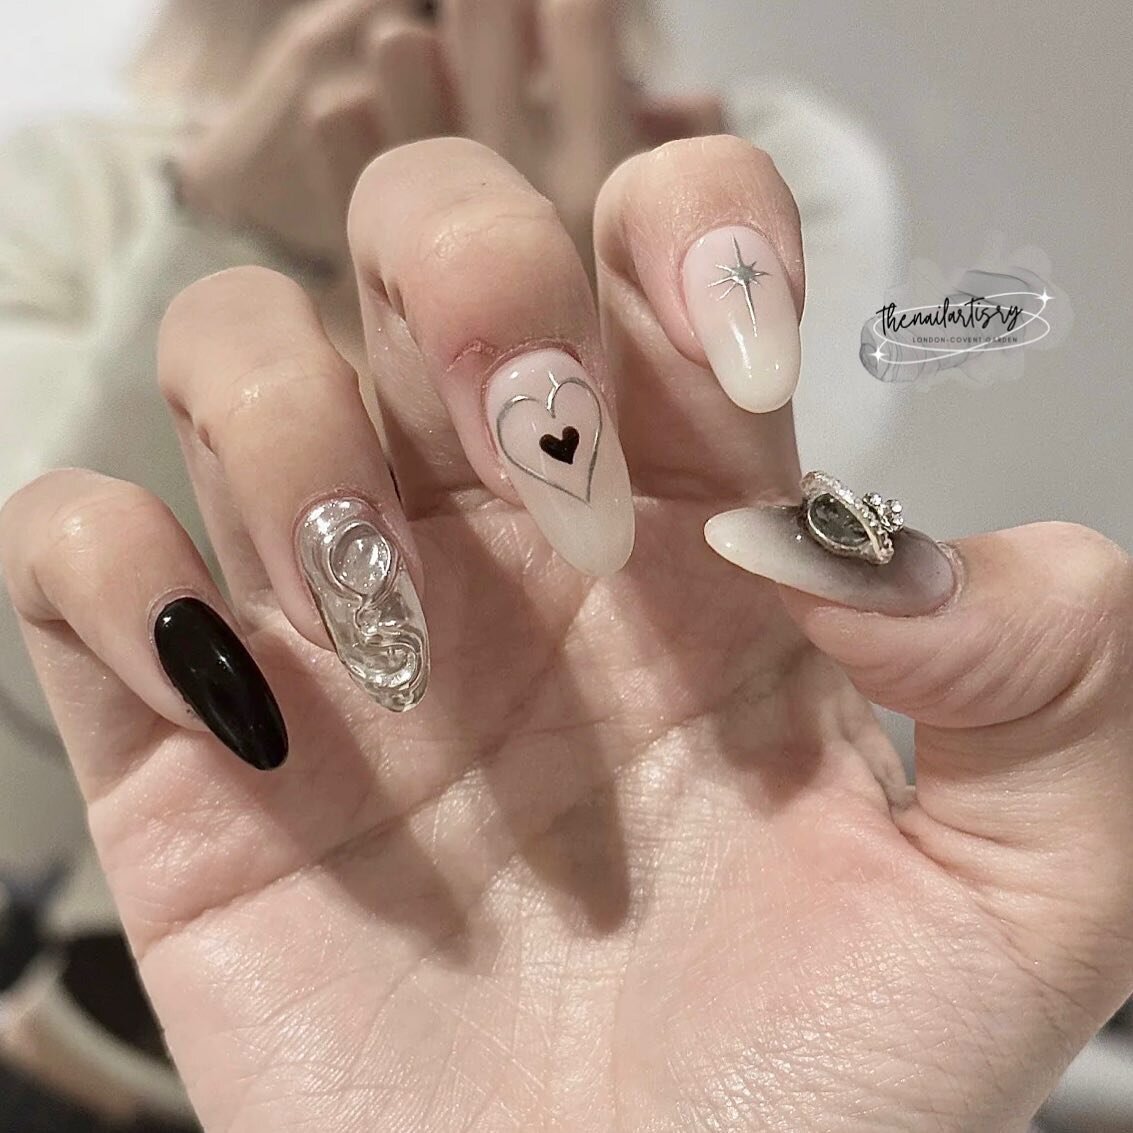 𝐘𝟐𝐊 𝐀𝐢𝐫𝐛𝐫𝐮𝐬𝐡 𝐒𝐭𝐲𝐥𝐞 🖤⛓

📸Camera. Action ✨ Nailseflie by our lovely client - let&rsquo;s us level-up your nails game 🙌🏼❤️&zwj;🔥

📲 Link to book via bio or call us 020 7018 6636.
📍 Covent Garden London
.
.
.
.
.
.
.
#y2k #y2knails